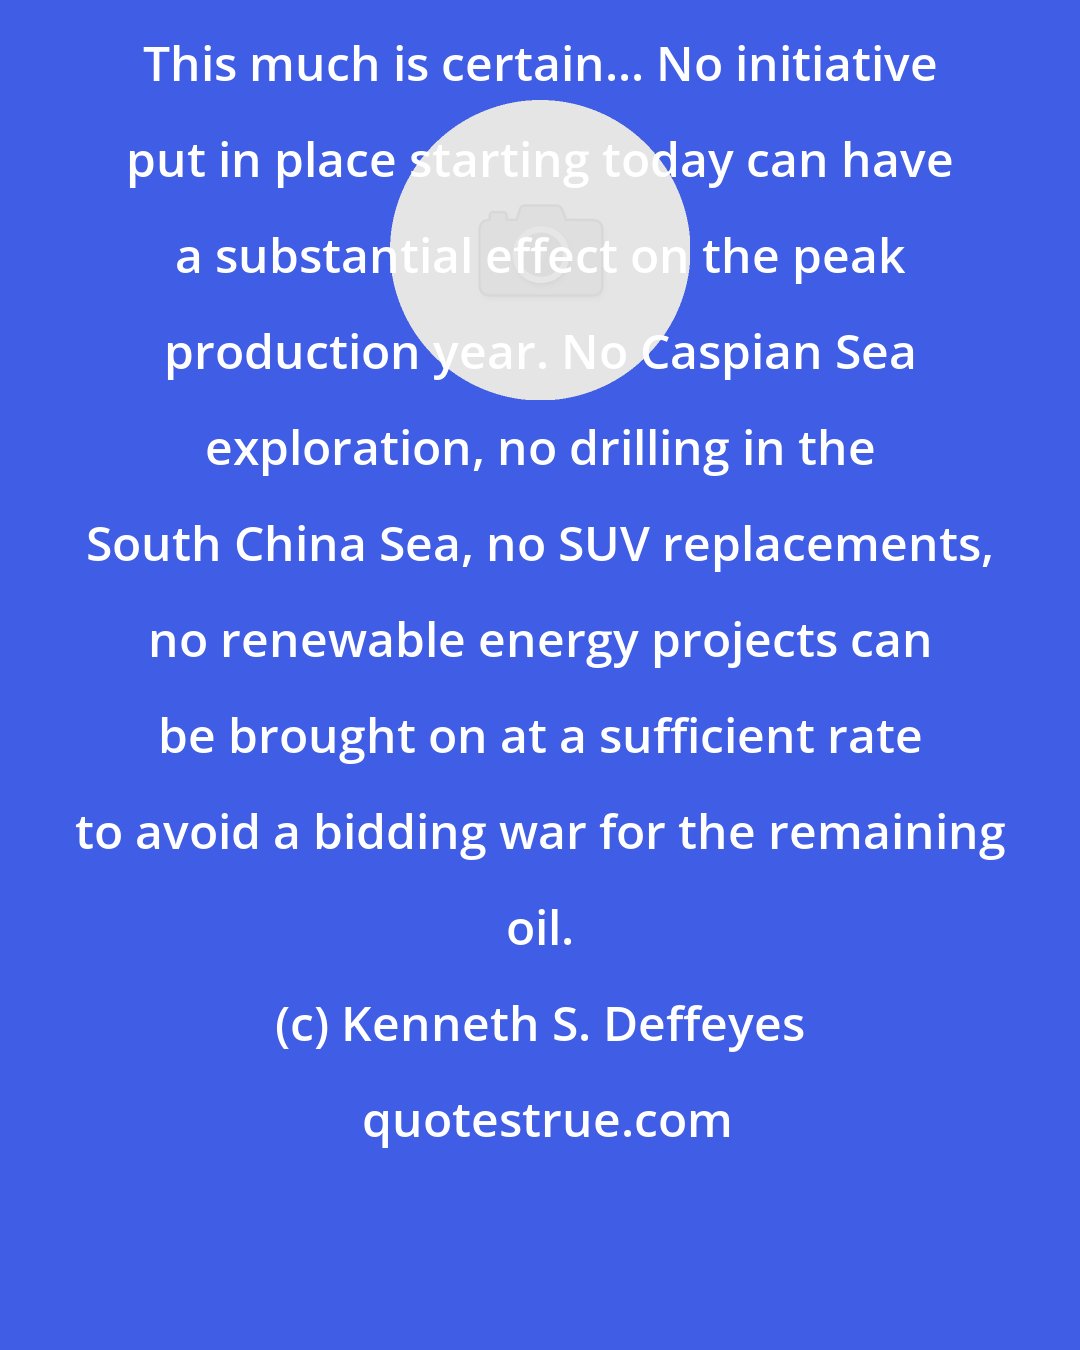 Kenneth S. Deffeyes: This much is certain... No initiative put in place starting today can have a substantial effect on the peak production year. No Caspian Sea exploration, no drilling in the South China Sea, no SUV replacements, no renewable energy projects can be brought on at a sufficient rate to avoid a bidding war for the remaining oil.